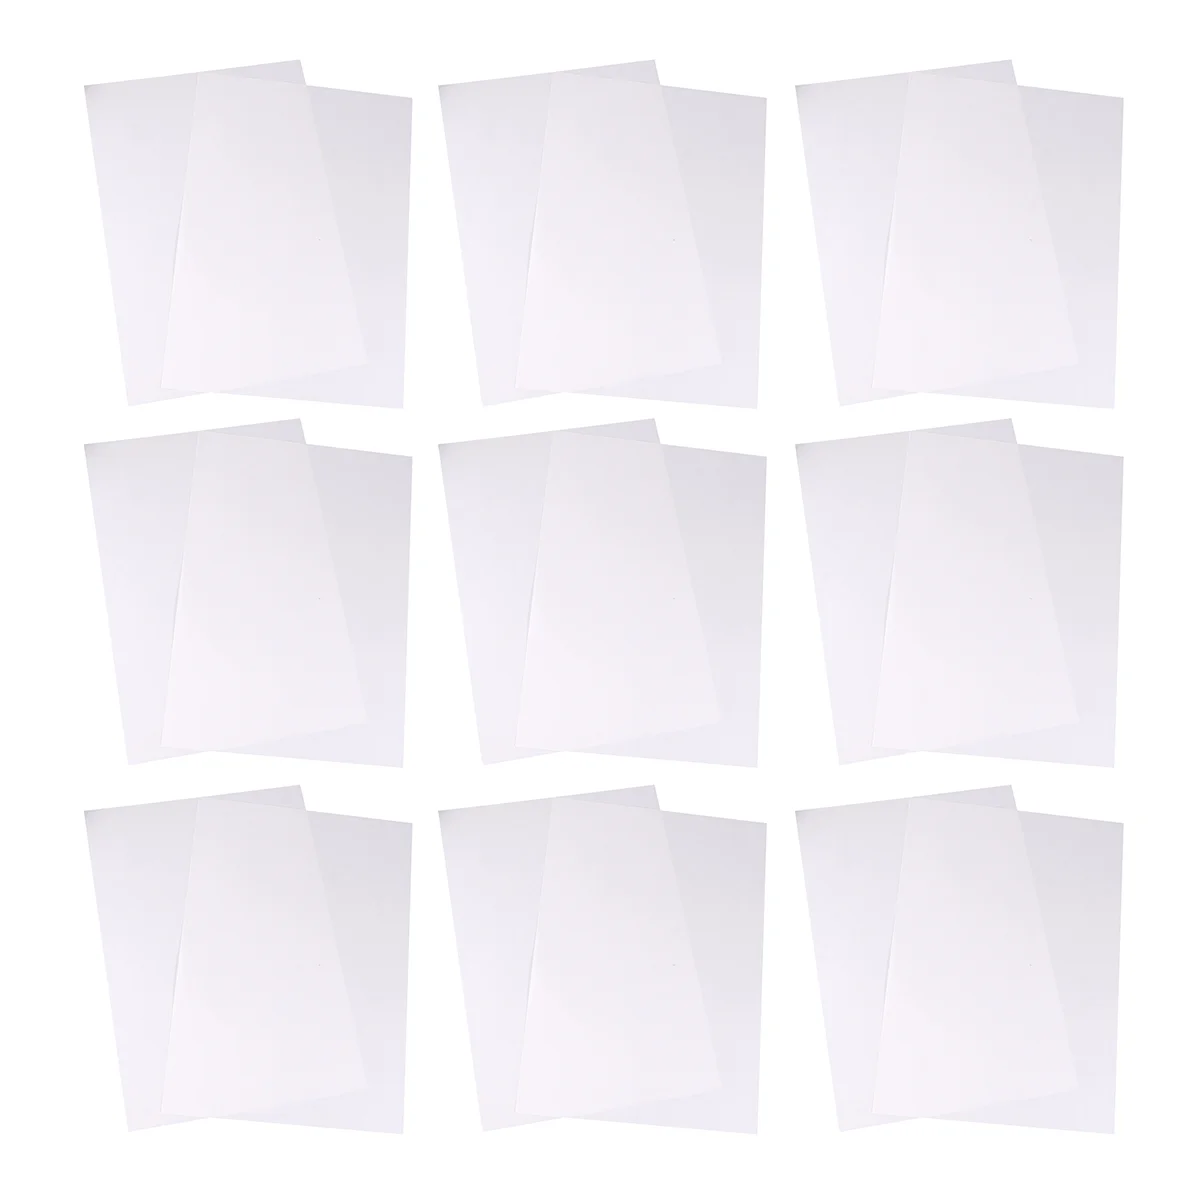 

100 Sheets White A4 Label Stickers Paper Hand Account Anti-adhesive Paper Anti-stick Isolation Paper Double-sided Blank Label